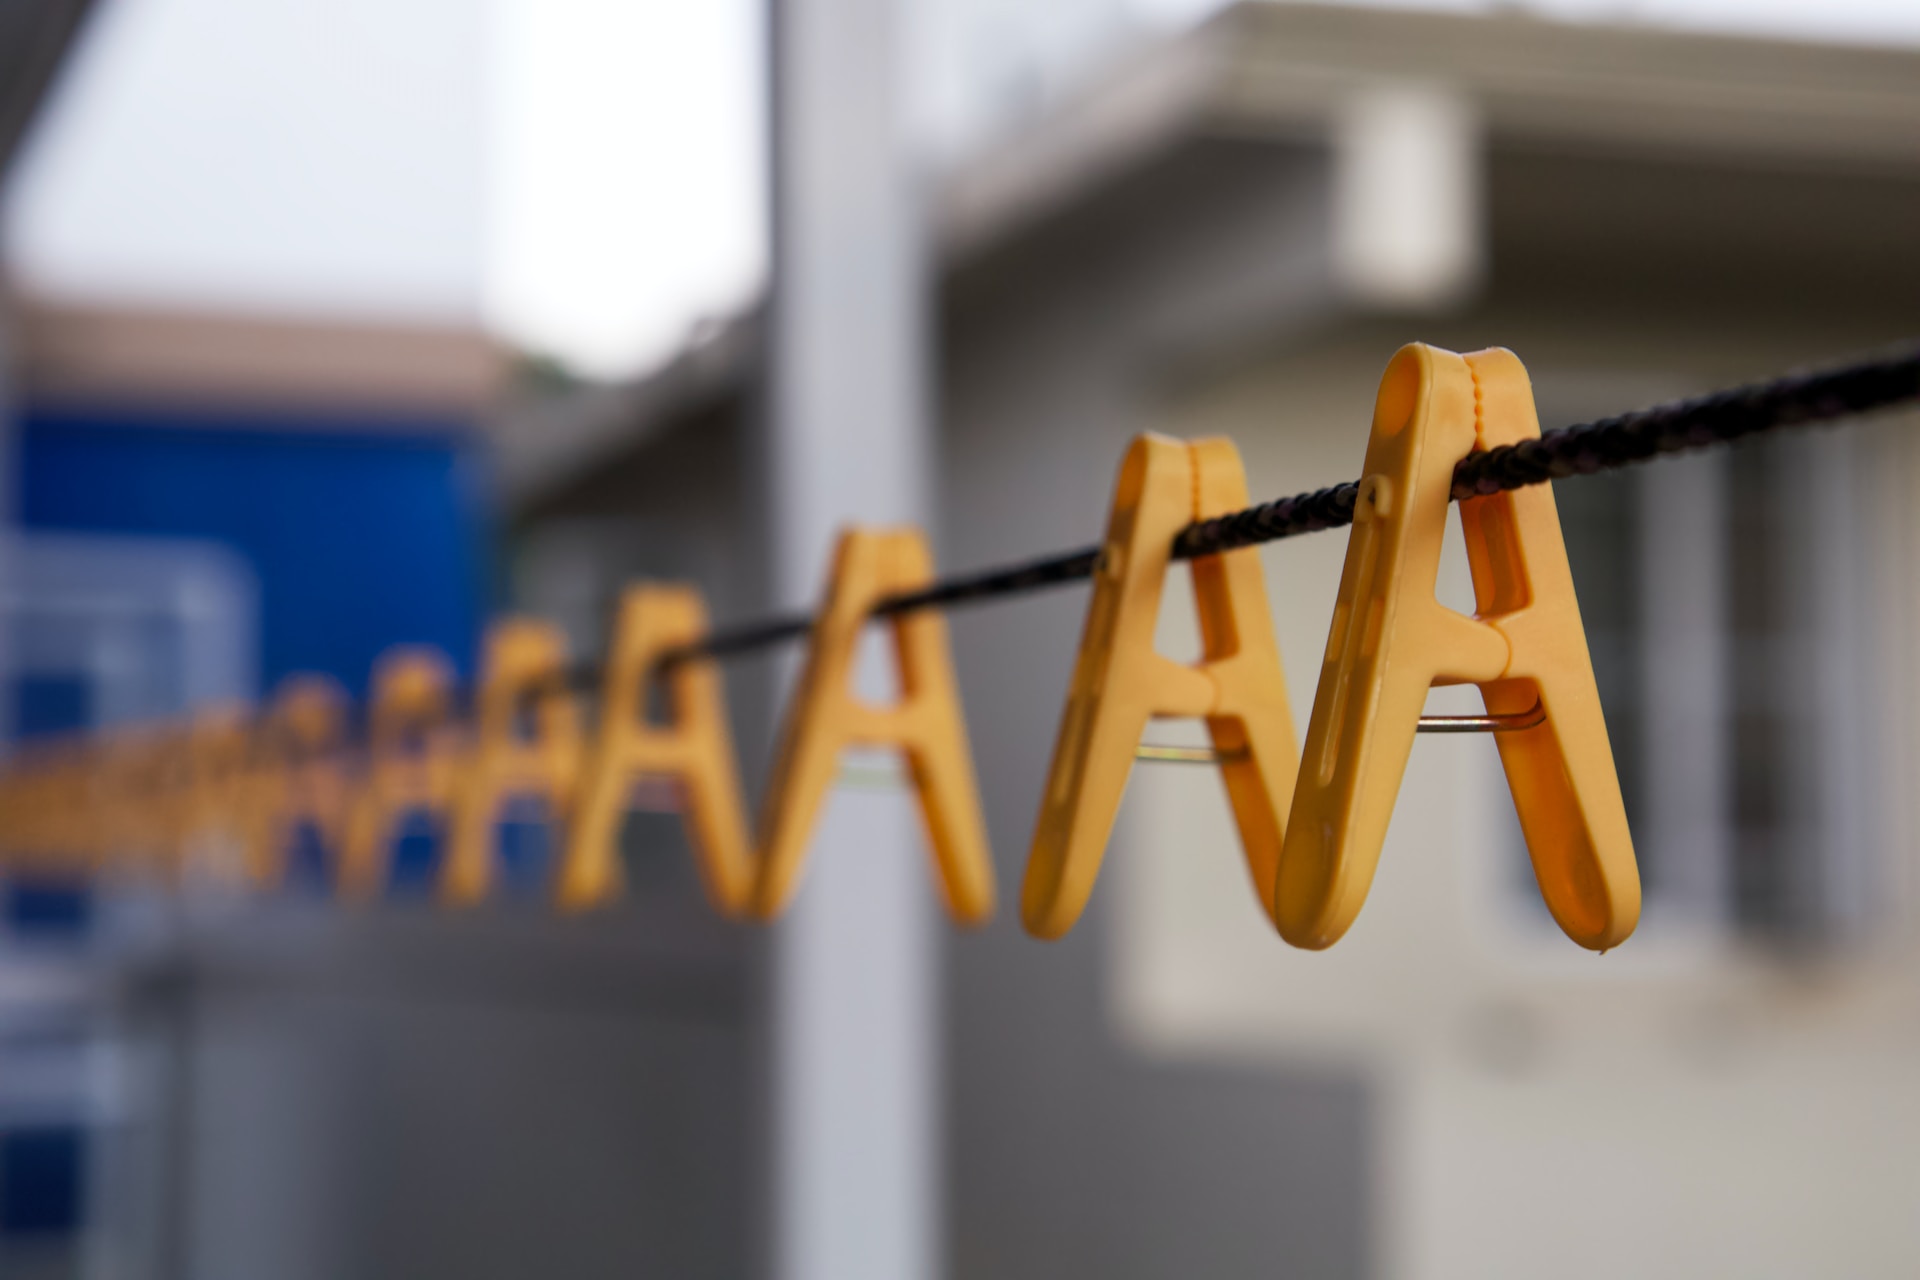 Photograph of clothespins hanging upside down on a clothesline, the clothespins resemble the letter "A".